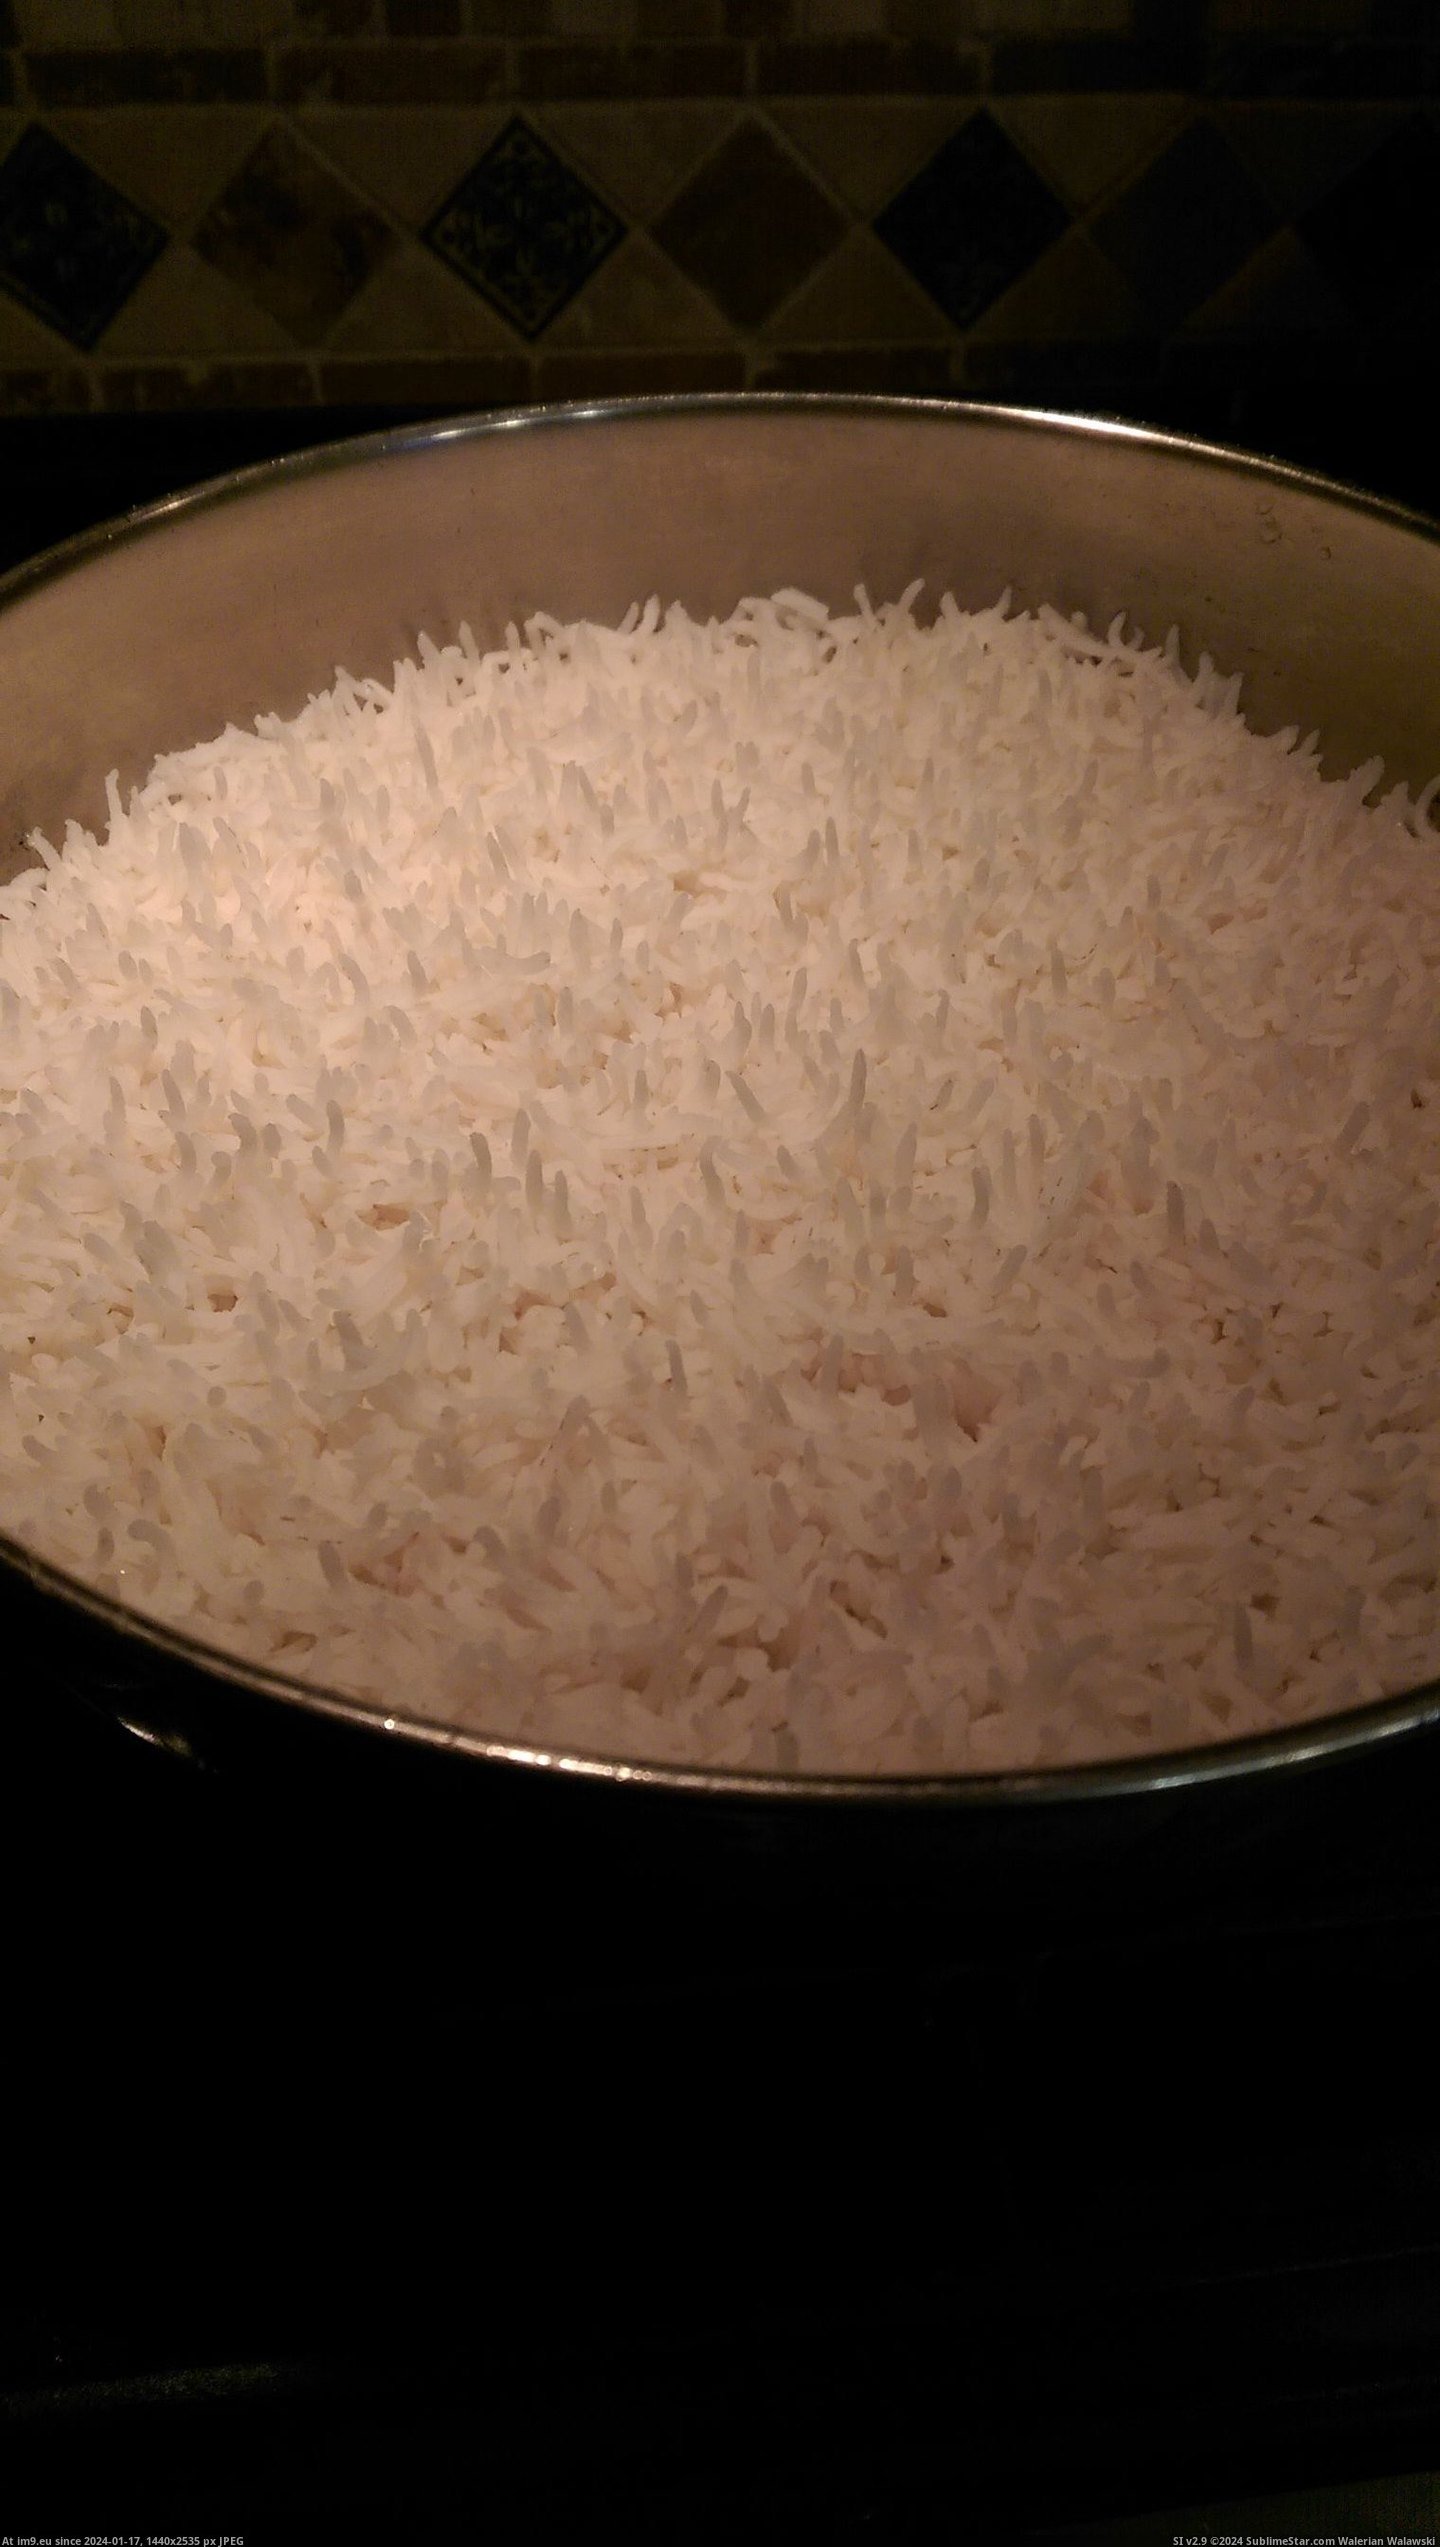 [Mildlyinteresting] The rice cooked for tonight stood up, literally (in My r/MILDLYINTERESTING favs)